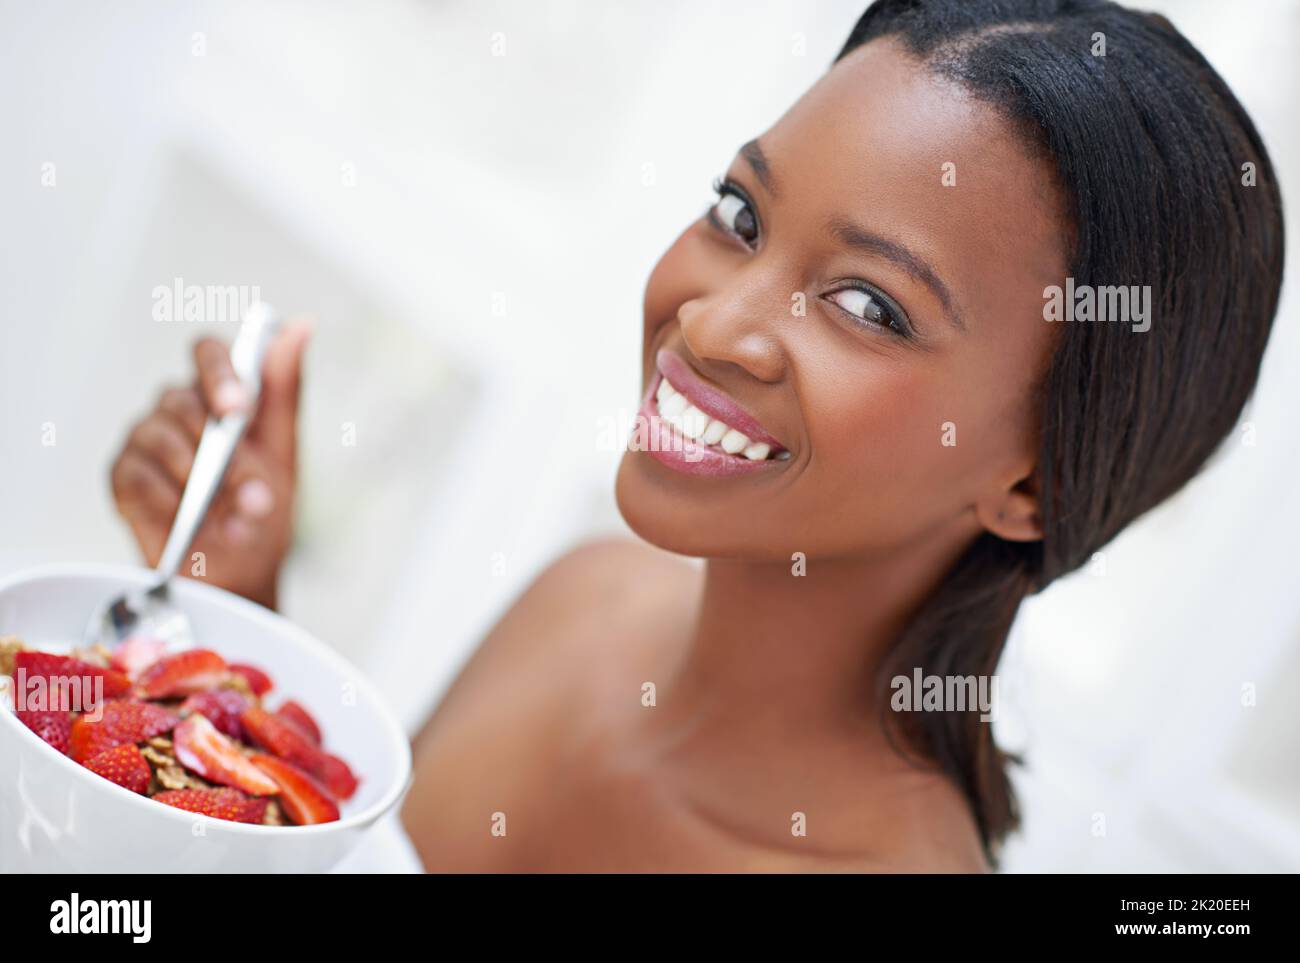 She stands out like a strawberry in a bowl of peas. a beautiful young woman eating strawberries. Stock Photo